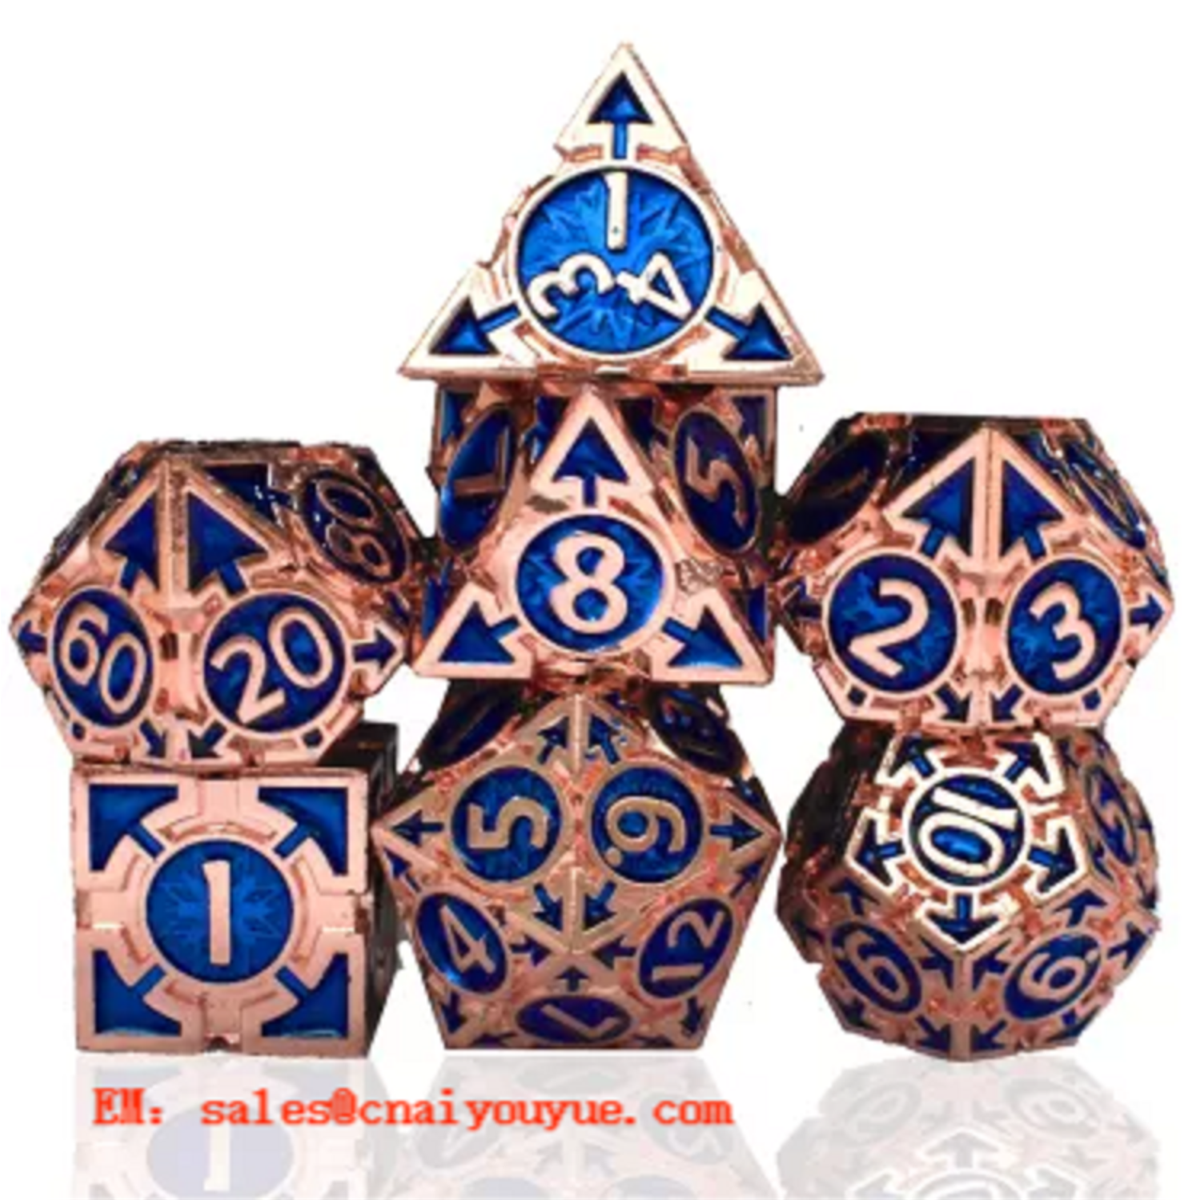 Factory wholesale metal dice new product DND game rpg game dice set of 7